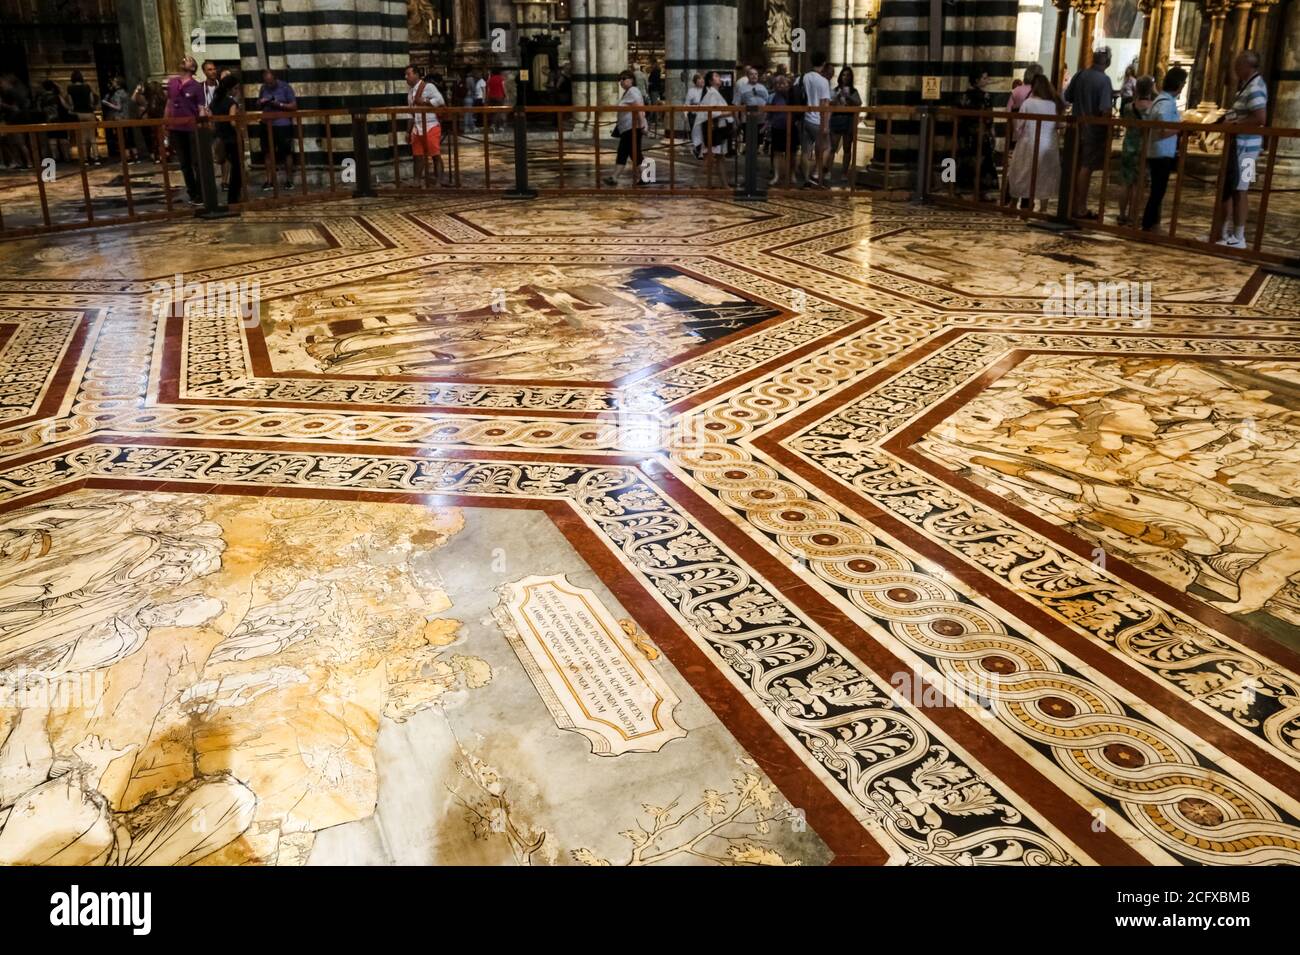 Gorgeous close-up view of the inlaid marble mosaic floor of the transept in the Siena Cathedral. The hexagonal shaped panels represent sibyls, scenes... Stock Photo